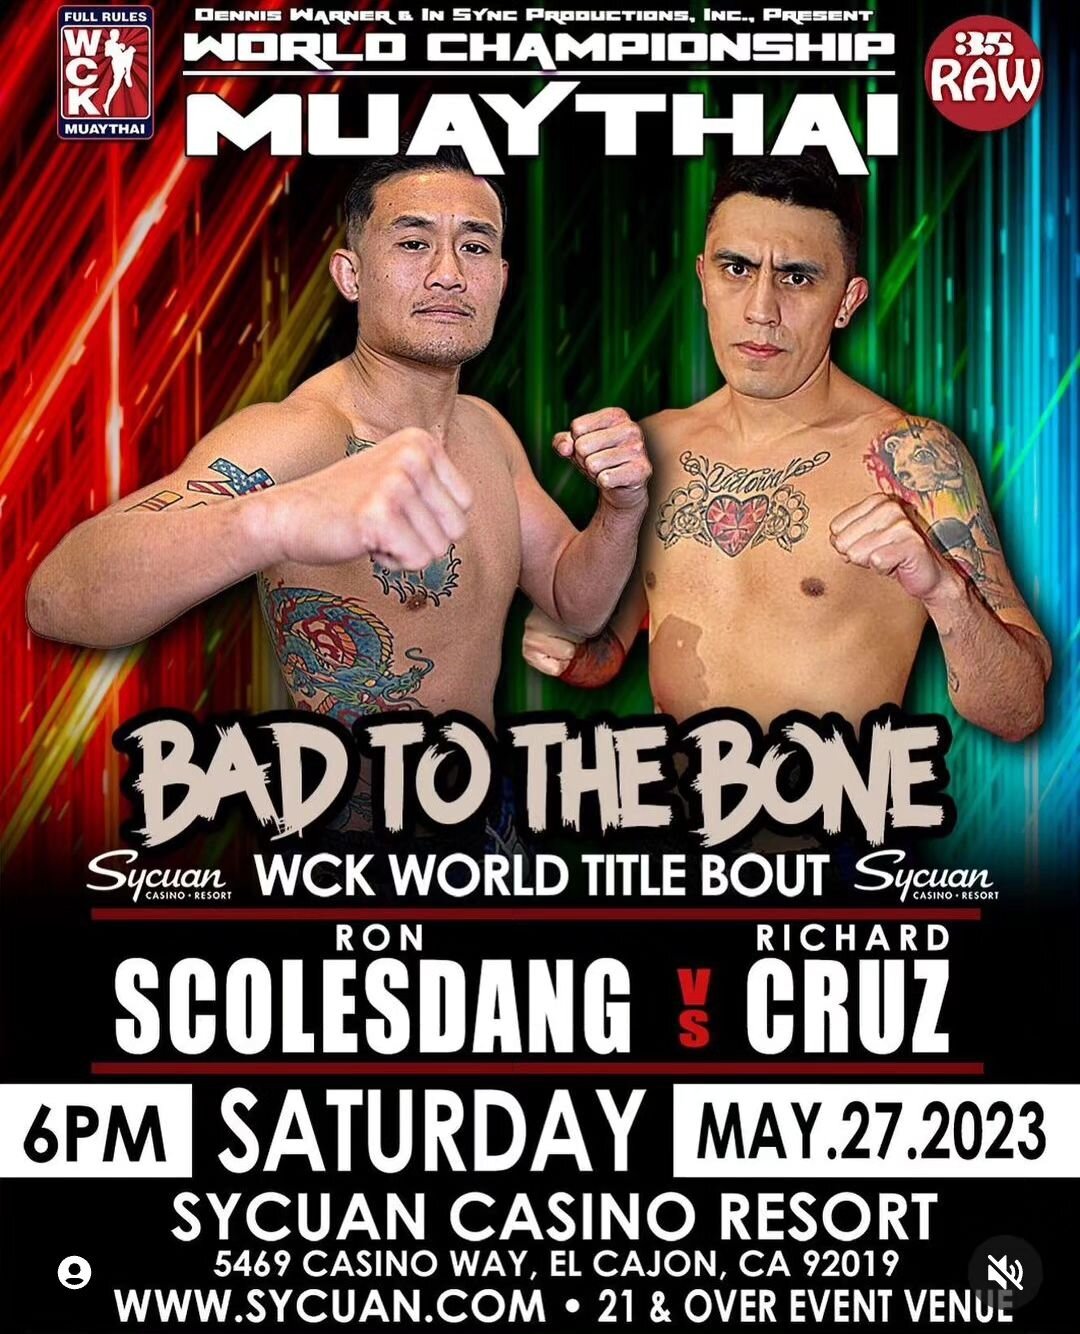 💥 FIGHT NEWS 💥

May 27th @scolesdang will be defending his WCK Title @sycuan_casinoresort 
&bull;&bull;&bull;&bull;&bull;&bull;
This is a fight you don't want to miss,
Ron always puts on a good show!
&bull;&bull;&bull;&bull;&bull;&bull;
Tickets are